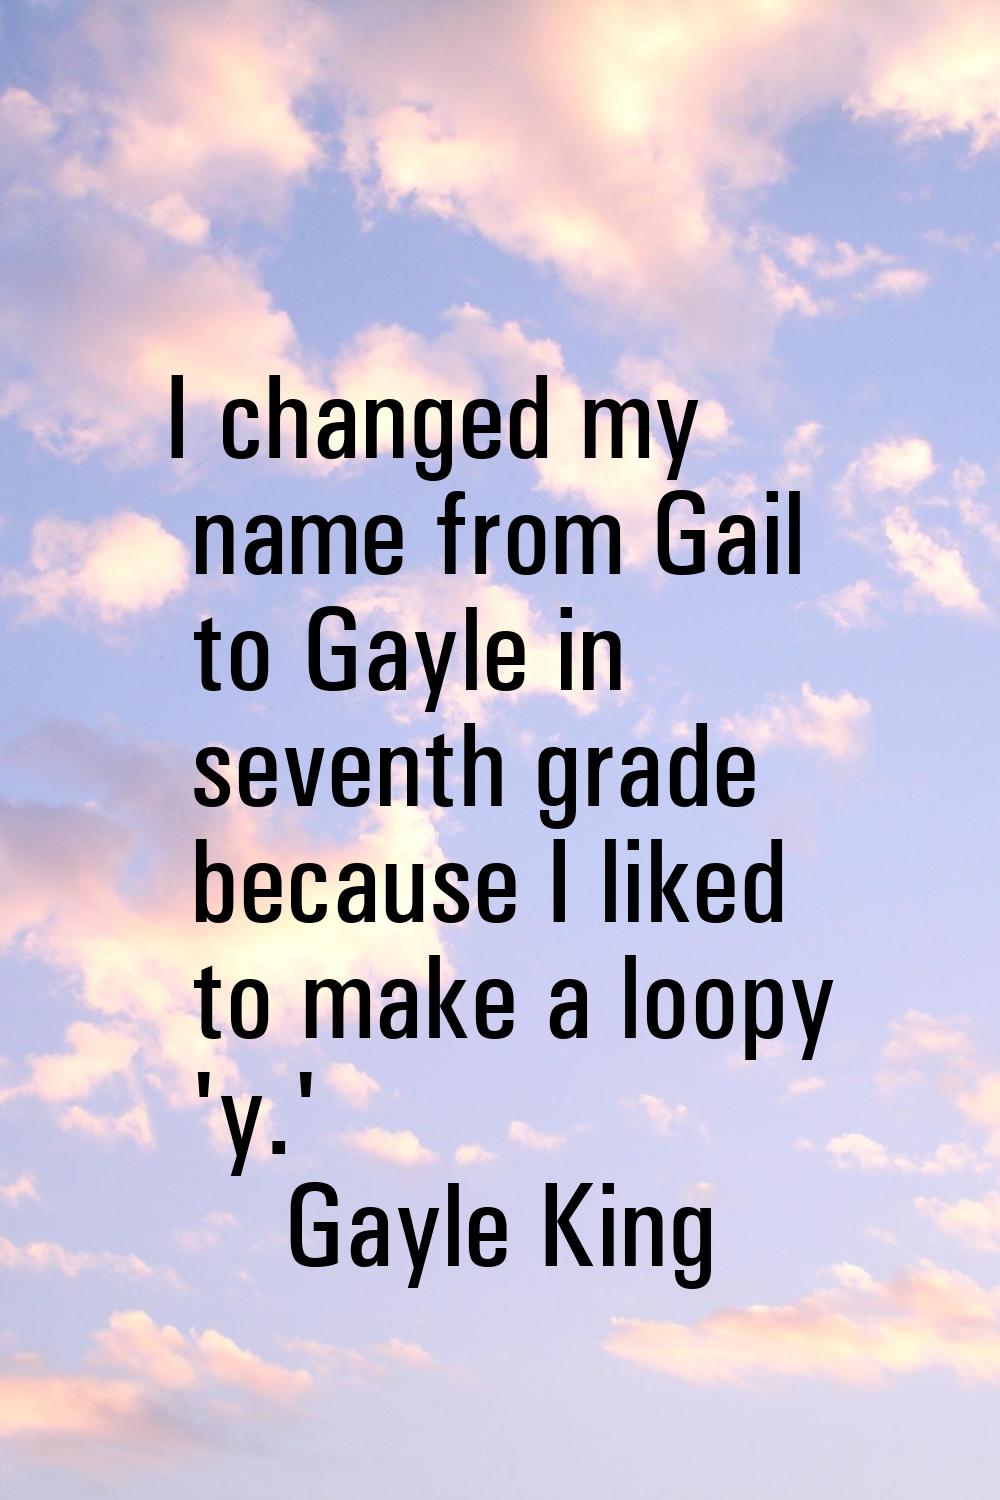 I changed my name from Gail to Gayle in seventh grade because I liked to make a loopy 'y.'